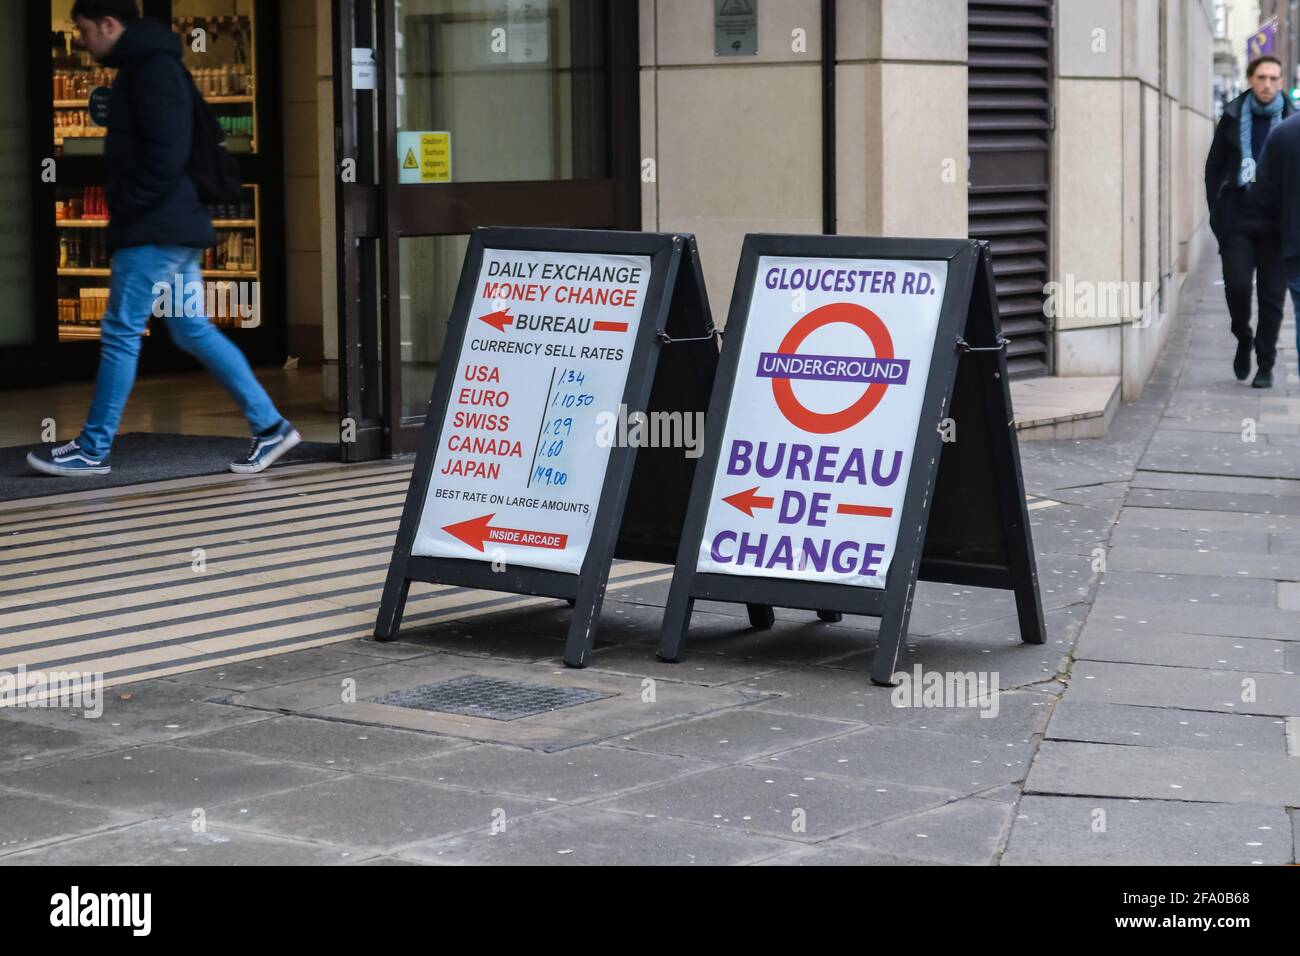 London England 1-10-2018  Signs standing on the sidewalk pointing inside for the Money Exchange and listing various currencies at Glouster Rd Undergro Stock Photo